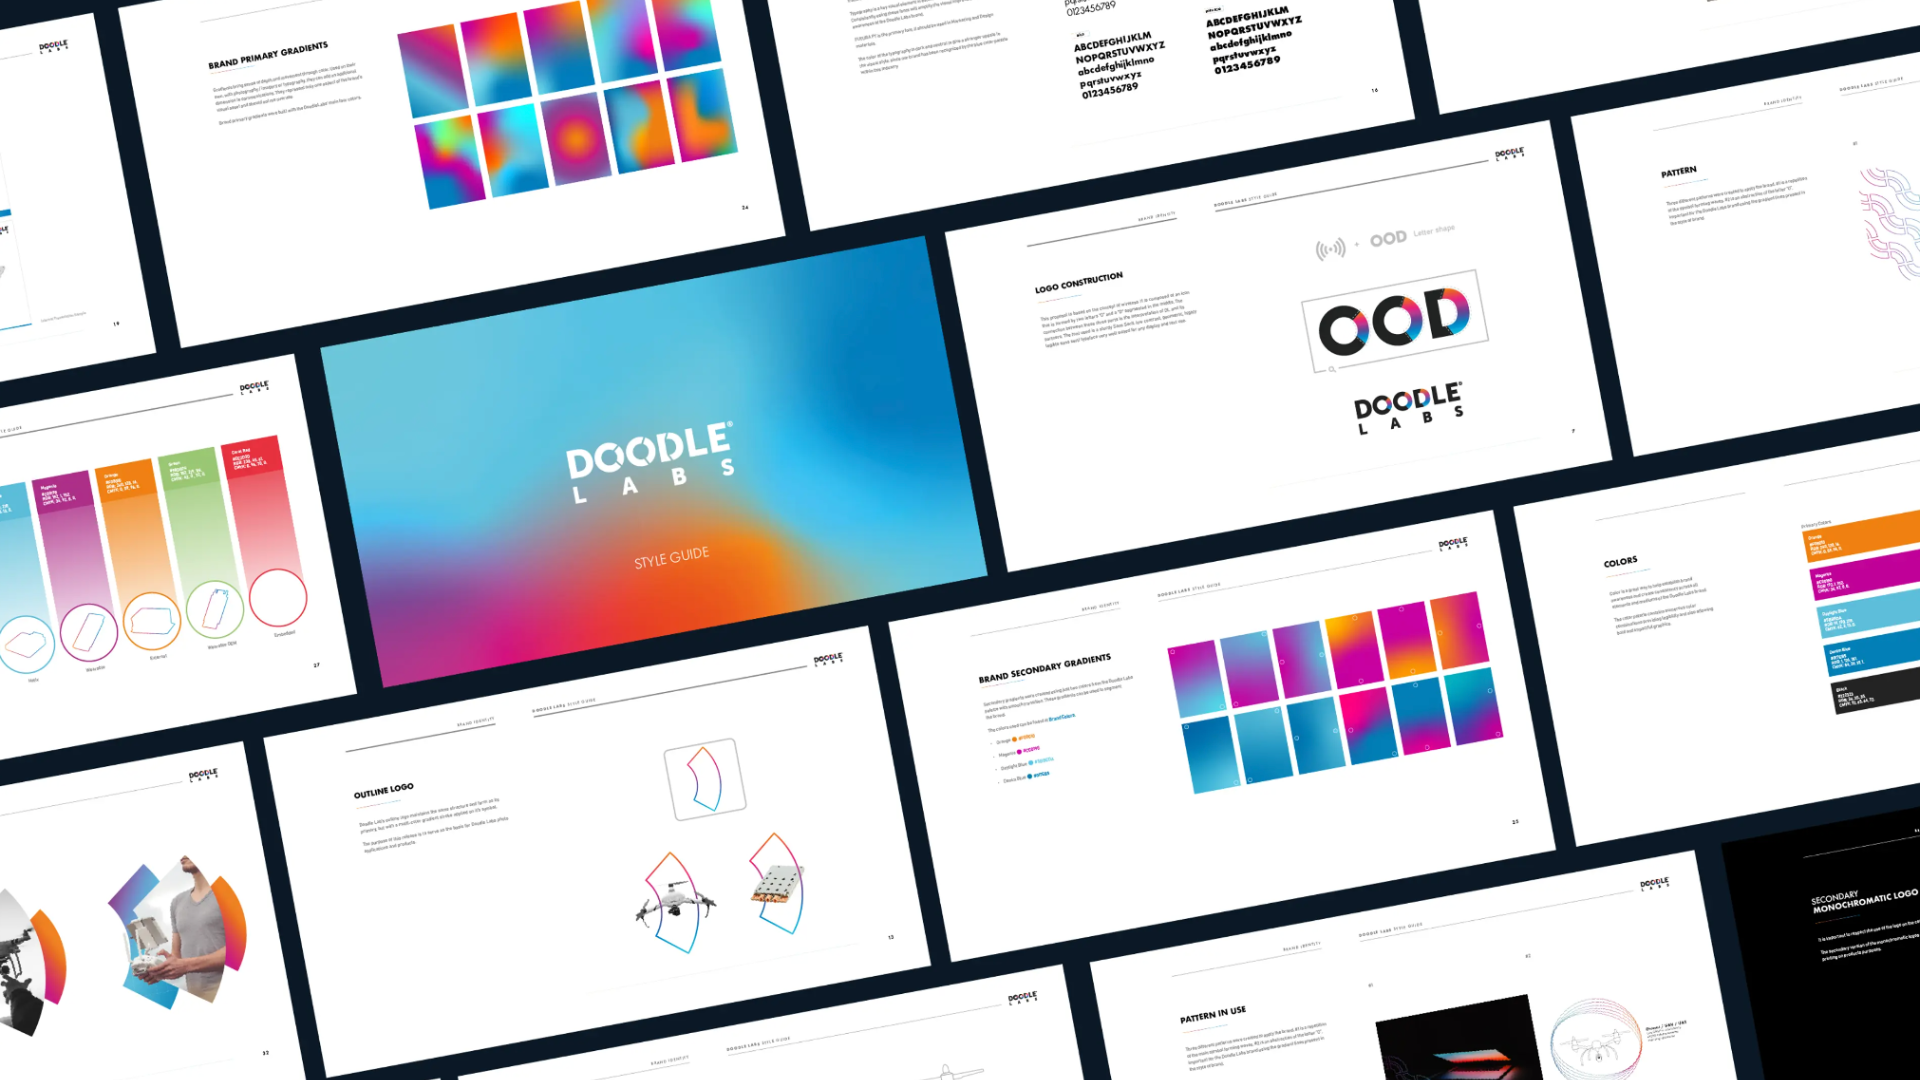 Doodle Labs brand kit created by Superside